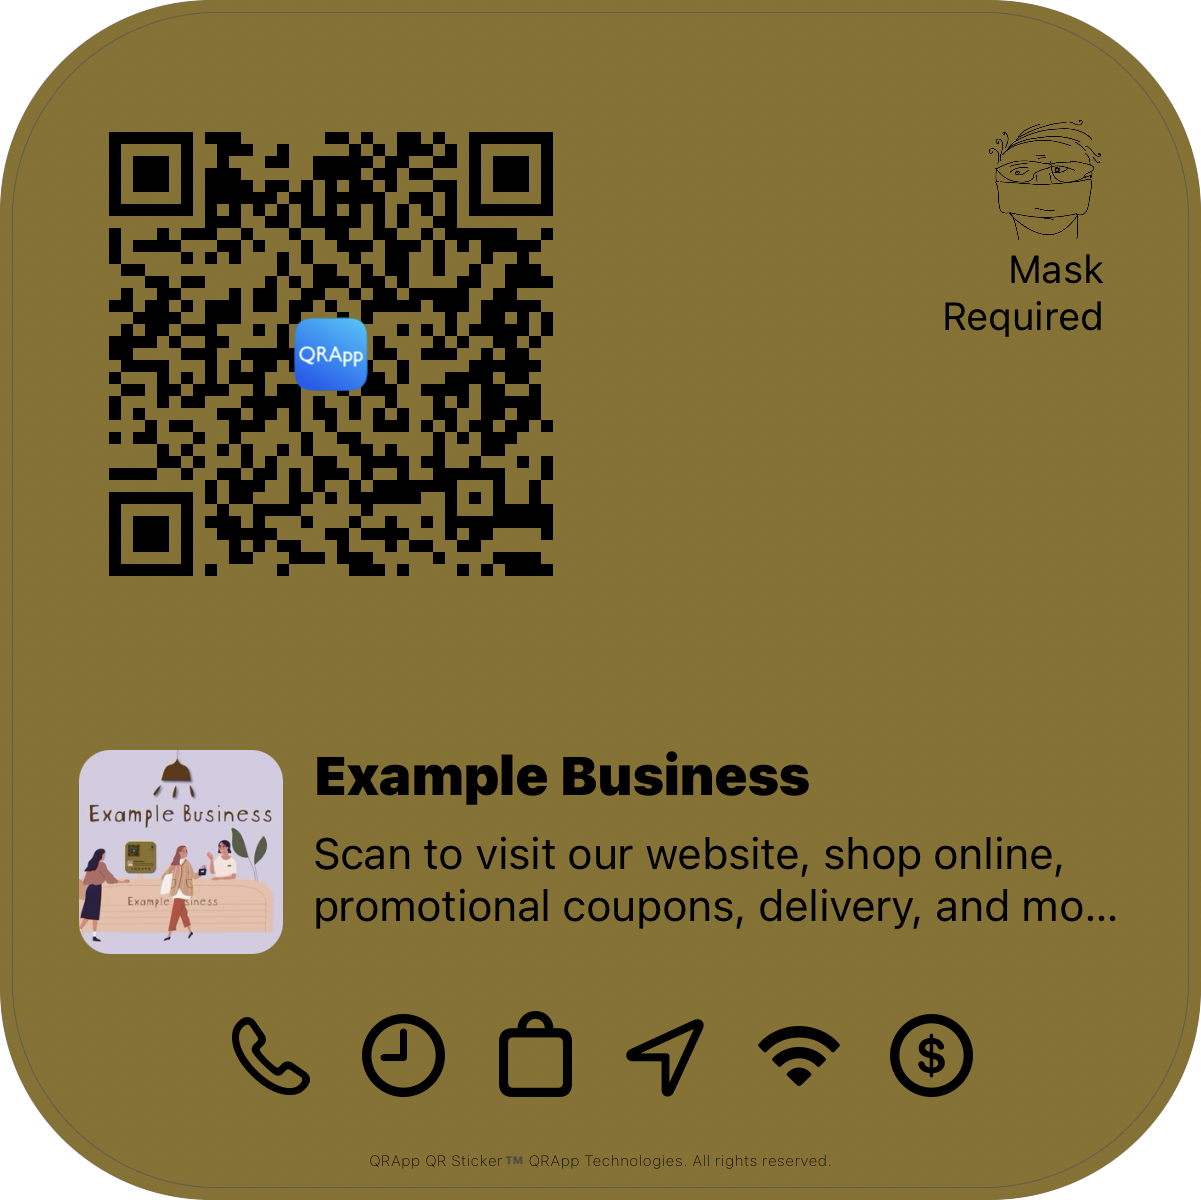 QR code for business. QRApp business QR code integrates a single QR code to access your business website, social media sites, address,
    phone number, business hours and many more important information within a single QR code. You can promote to your local customers with QRApp Coupons and Video Ads.